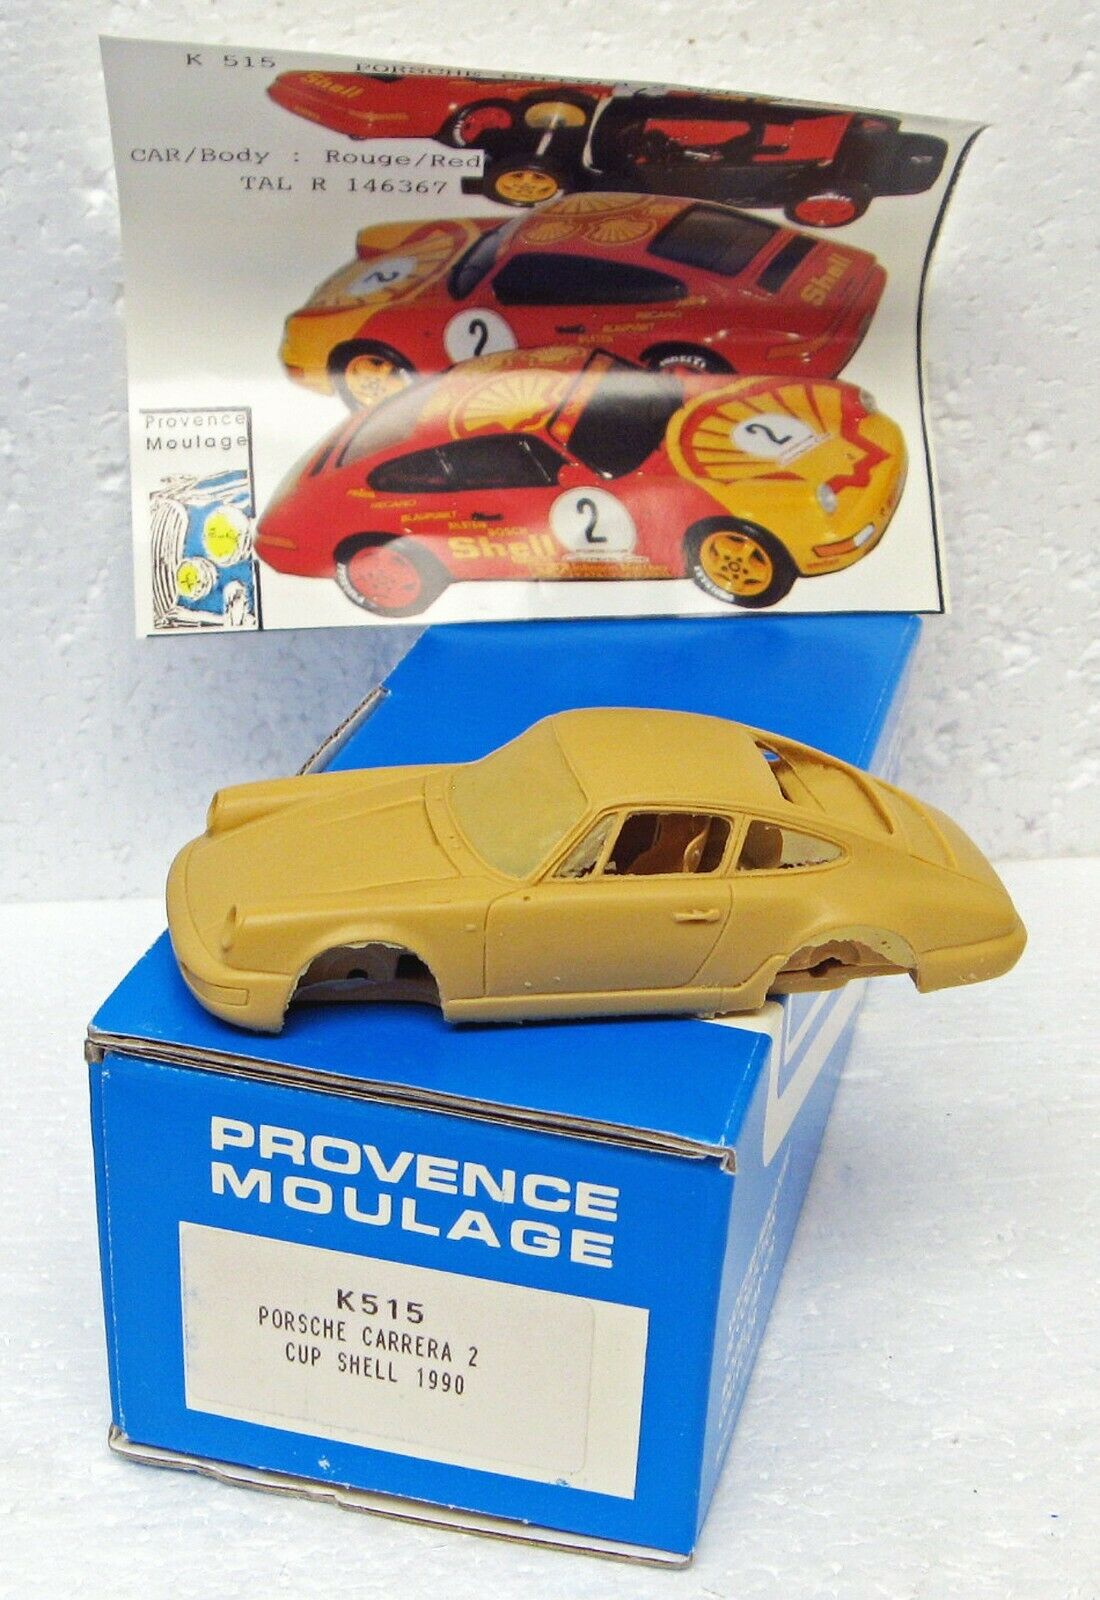 1990 Porsche Carrera 2 Cup Shell 1/43 Provence Moulage K515 France Mb